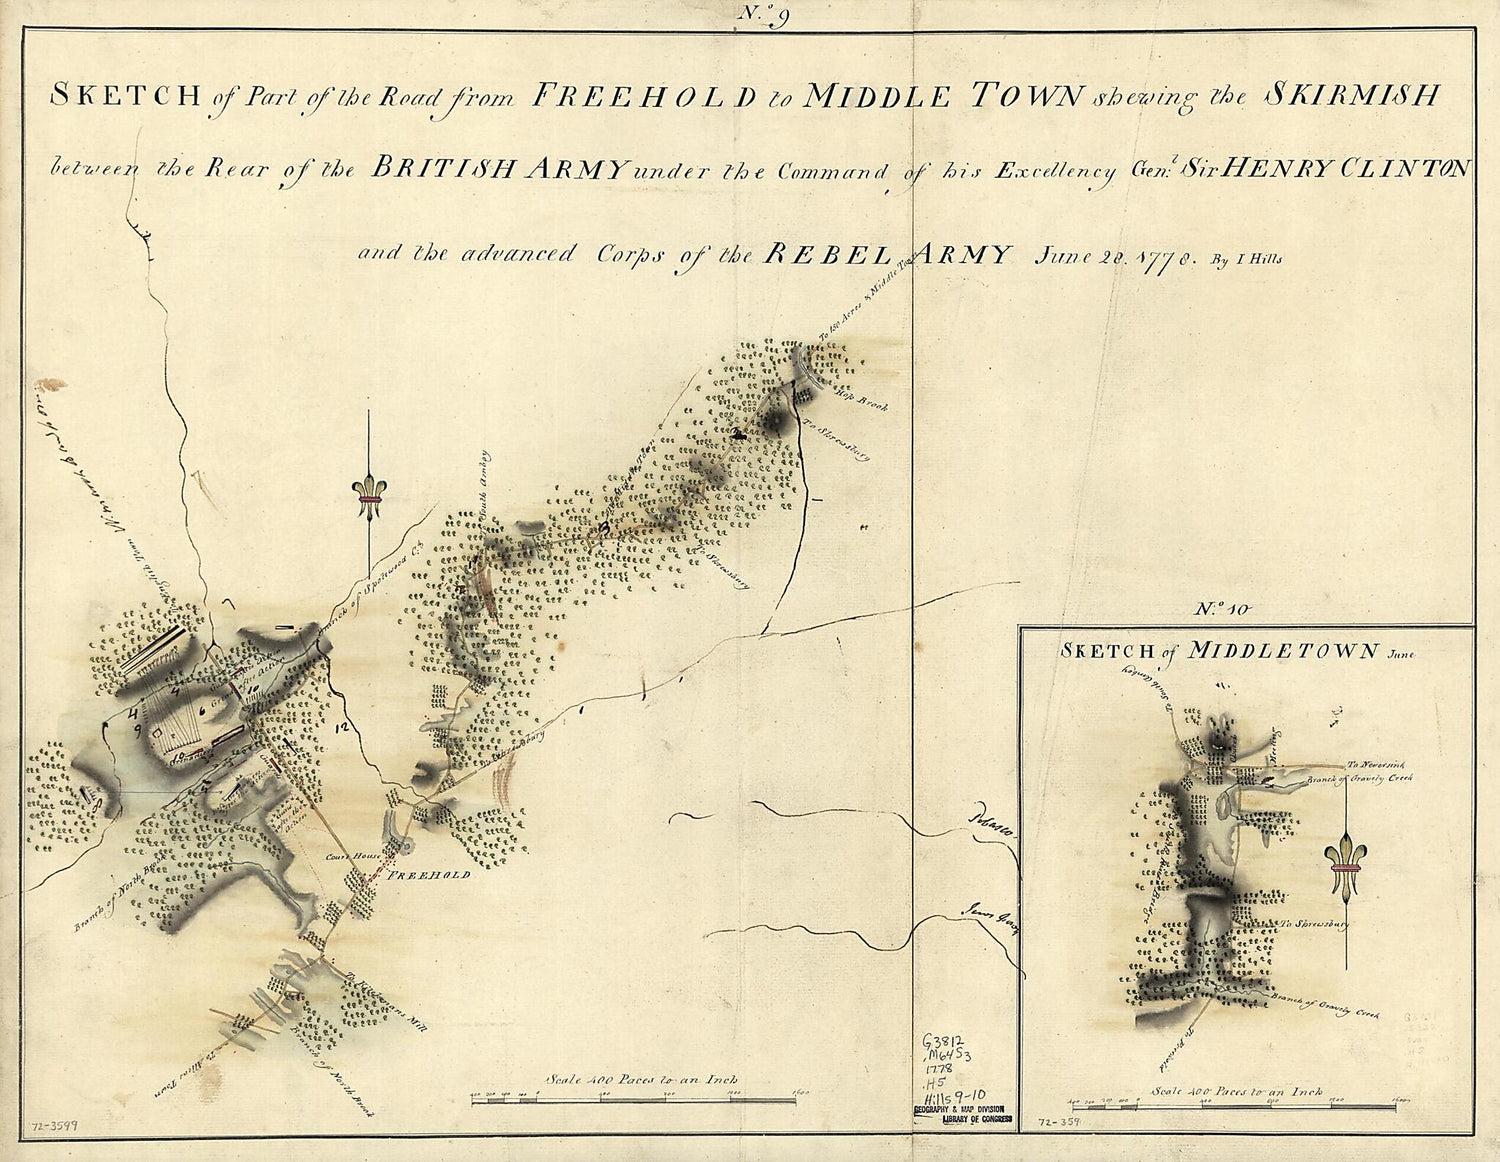 This old map of Sketch of Part of the Road from Freehold to Middle Town Shewing the Skirmish Between the Rear of the British Army Under the Command of His Excellency Genl: Sir Henry Clinton and the Advance Corps of the Rebel Army, June 28, from 1778 was 